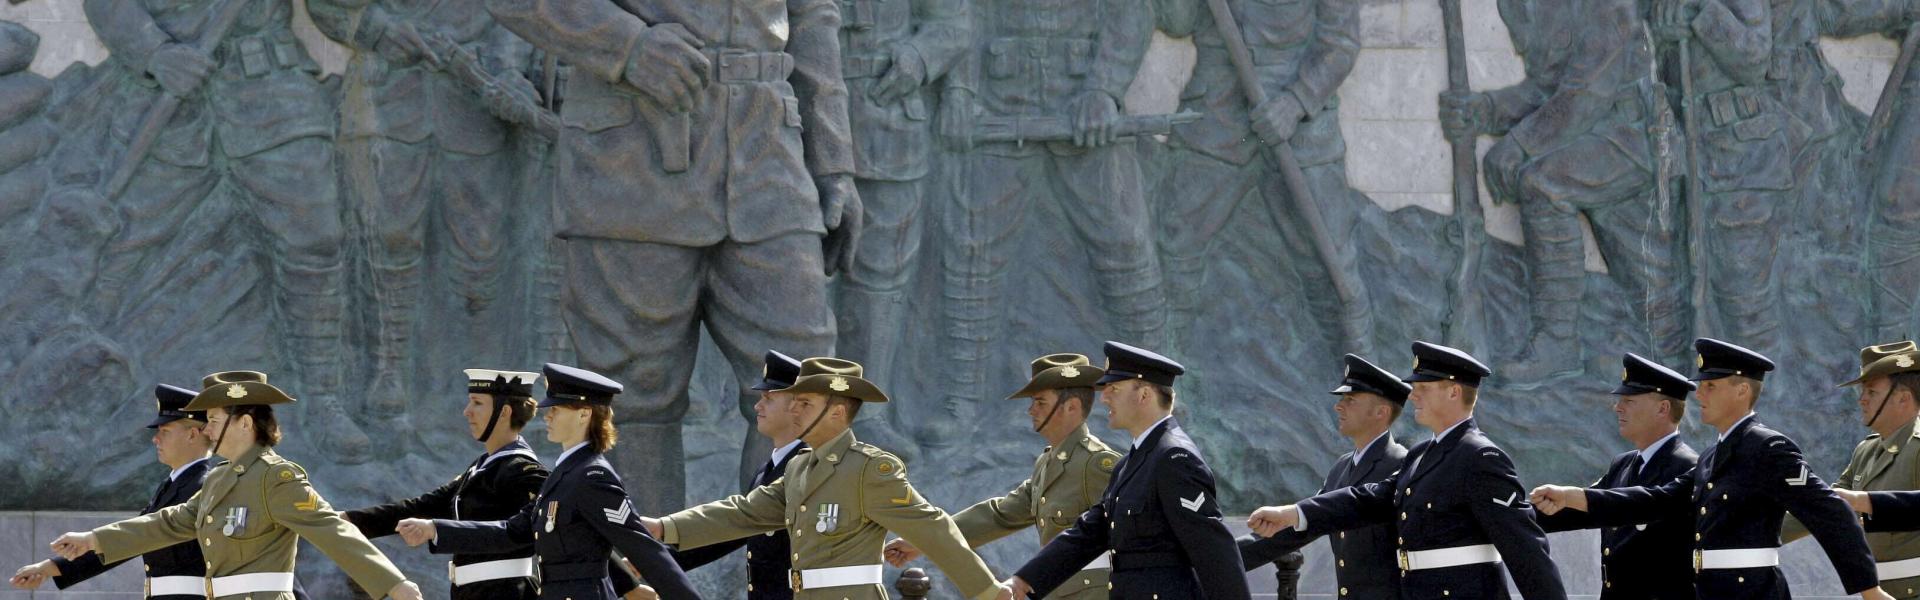 Weeks after Erdoğan threat, ANZAC events to proceed with high security 2